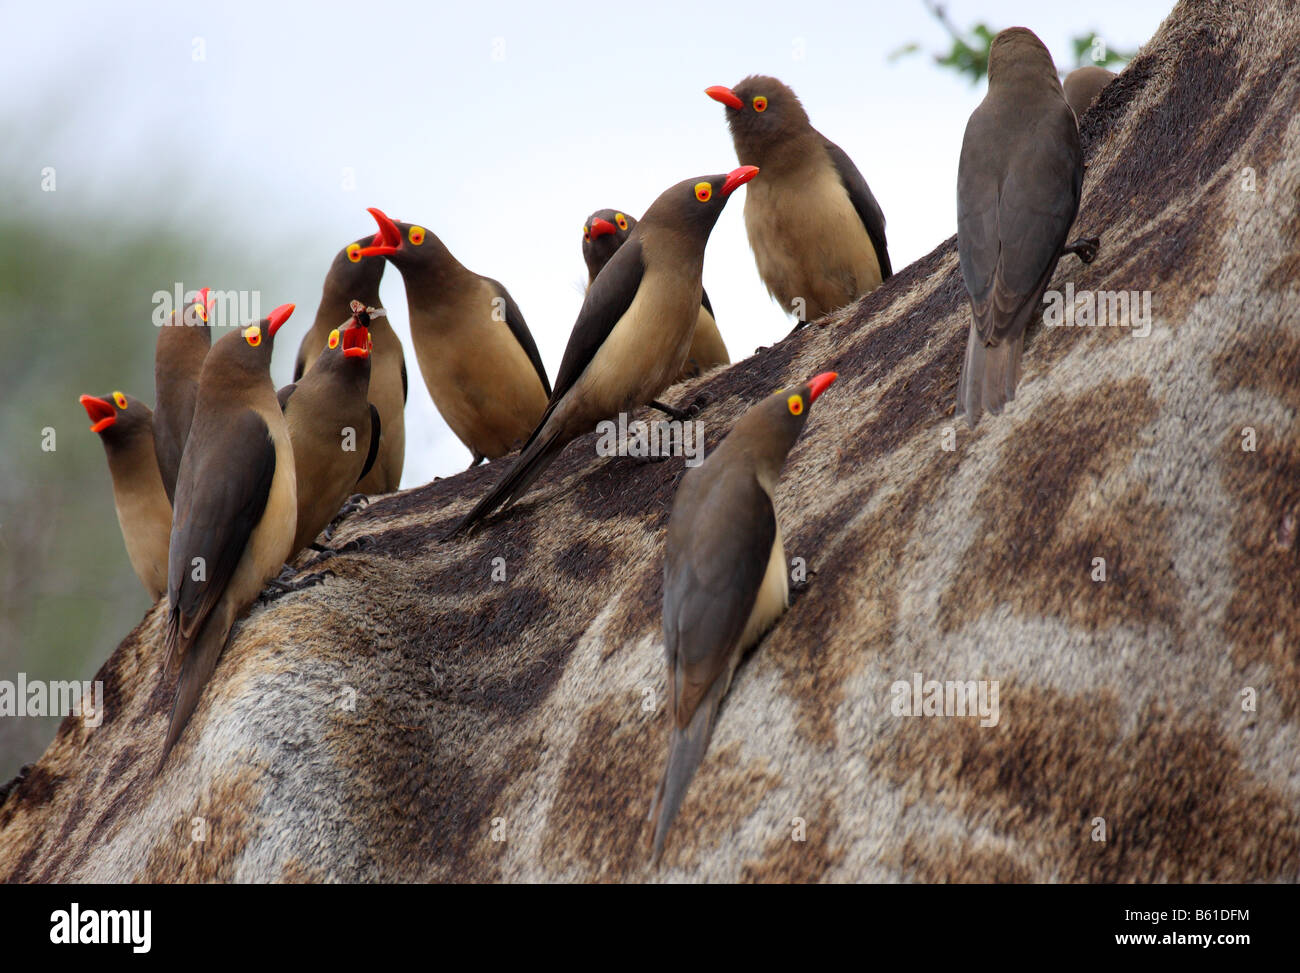 redbilled oxpeckers group on back of giraffe feeding on flying termites Stock Photo